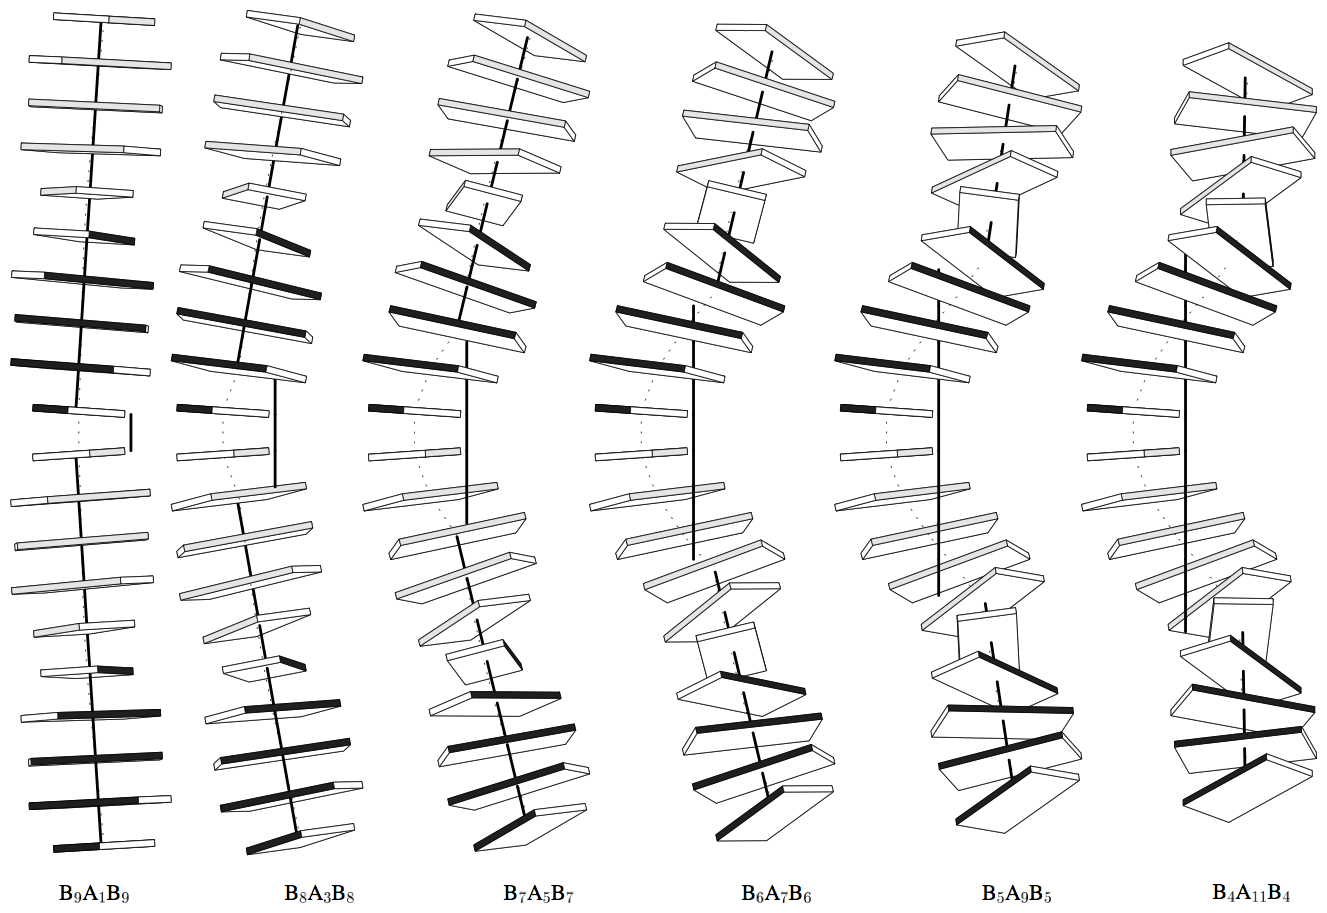 Global bending of DNA associated with selective B → A conformational transformation